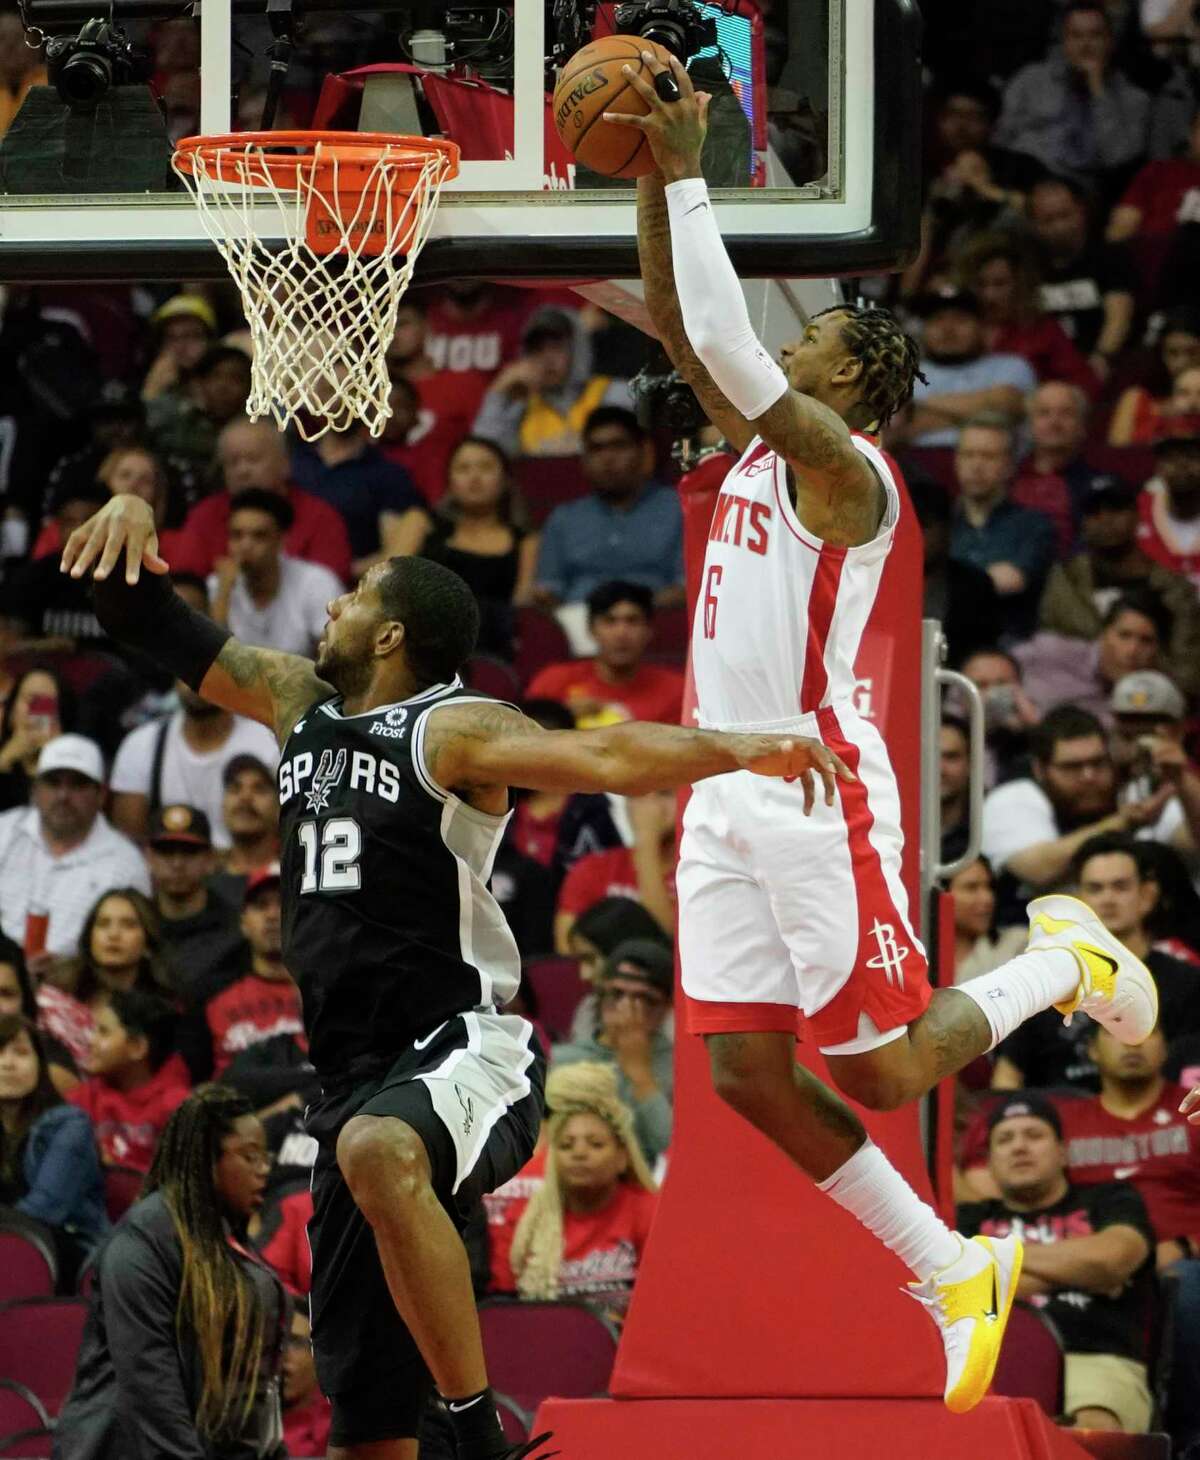 Houston Rockets Ben McLemore dunks the ball past San Antonio Spurs LaMarcus Aldridge during the first half of NBA game at Toyota Center Wednesday, Oct. 16, 2019, in Houston.